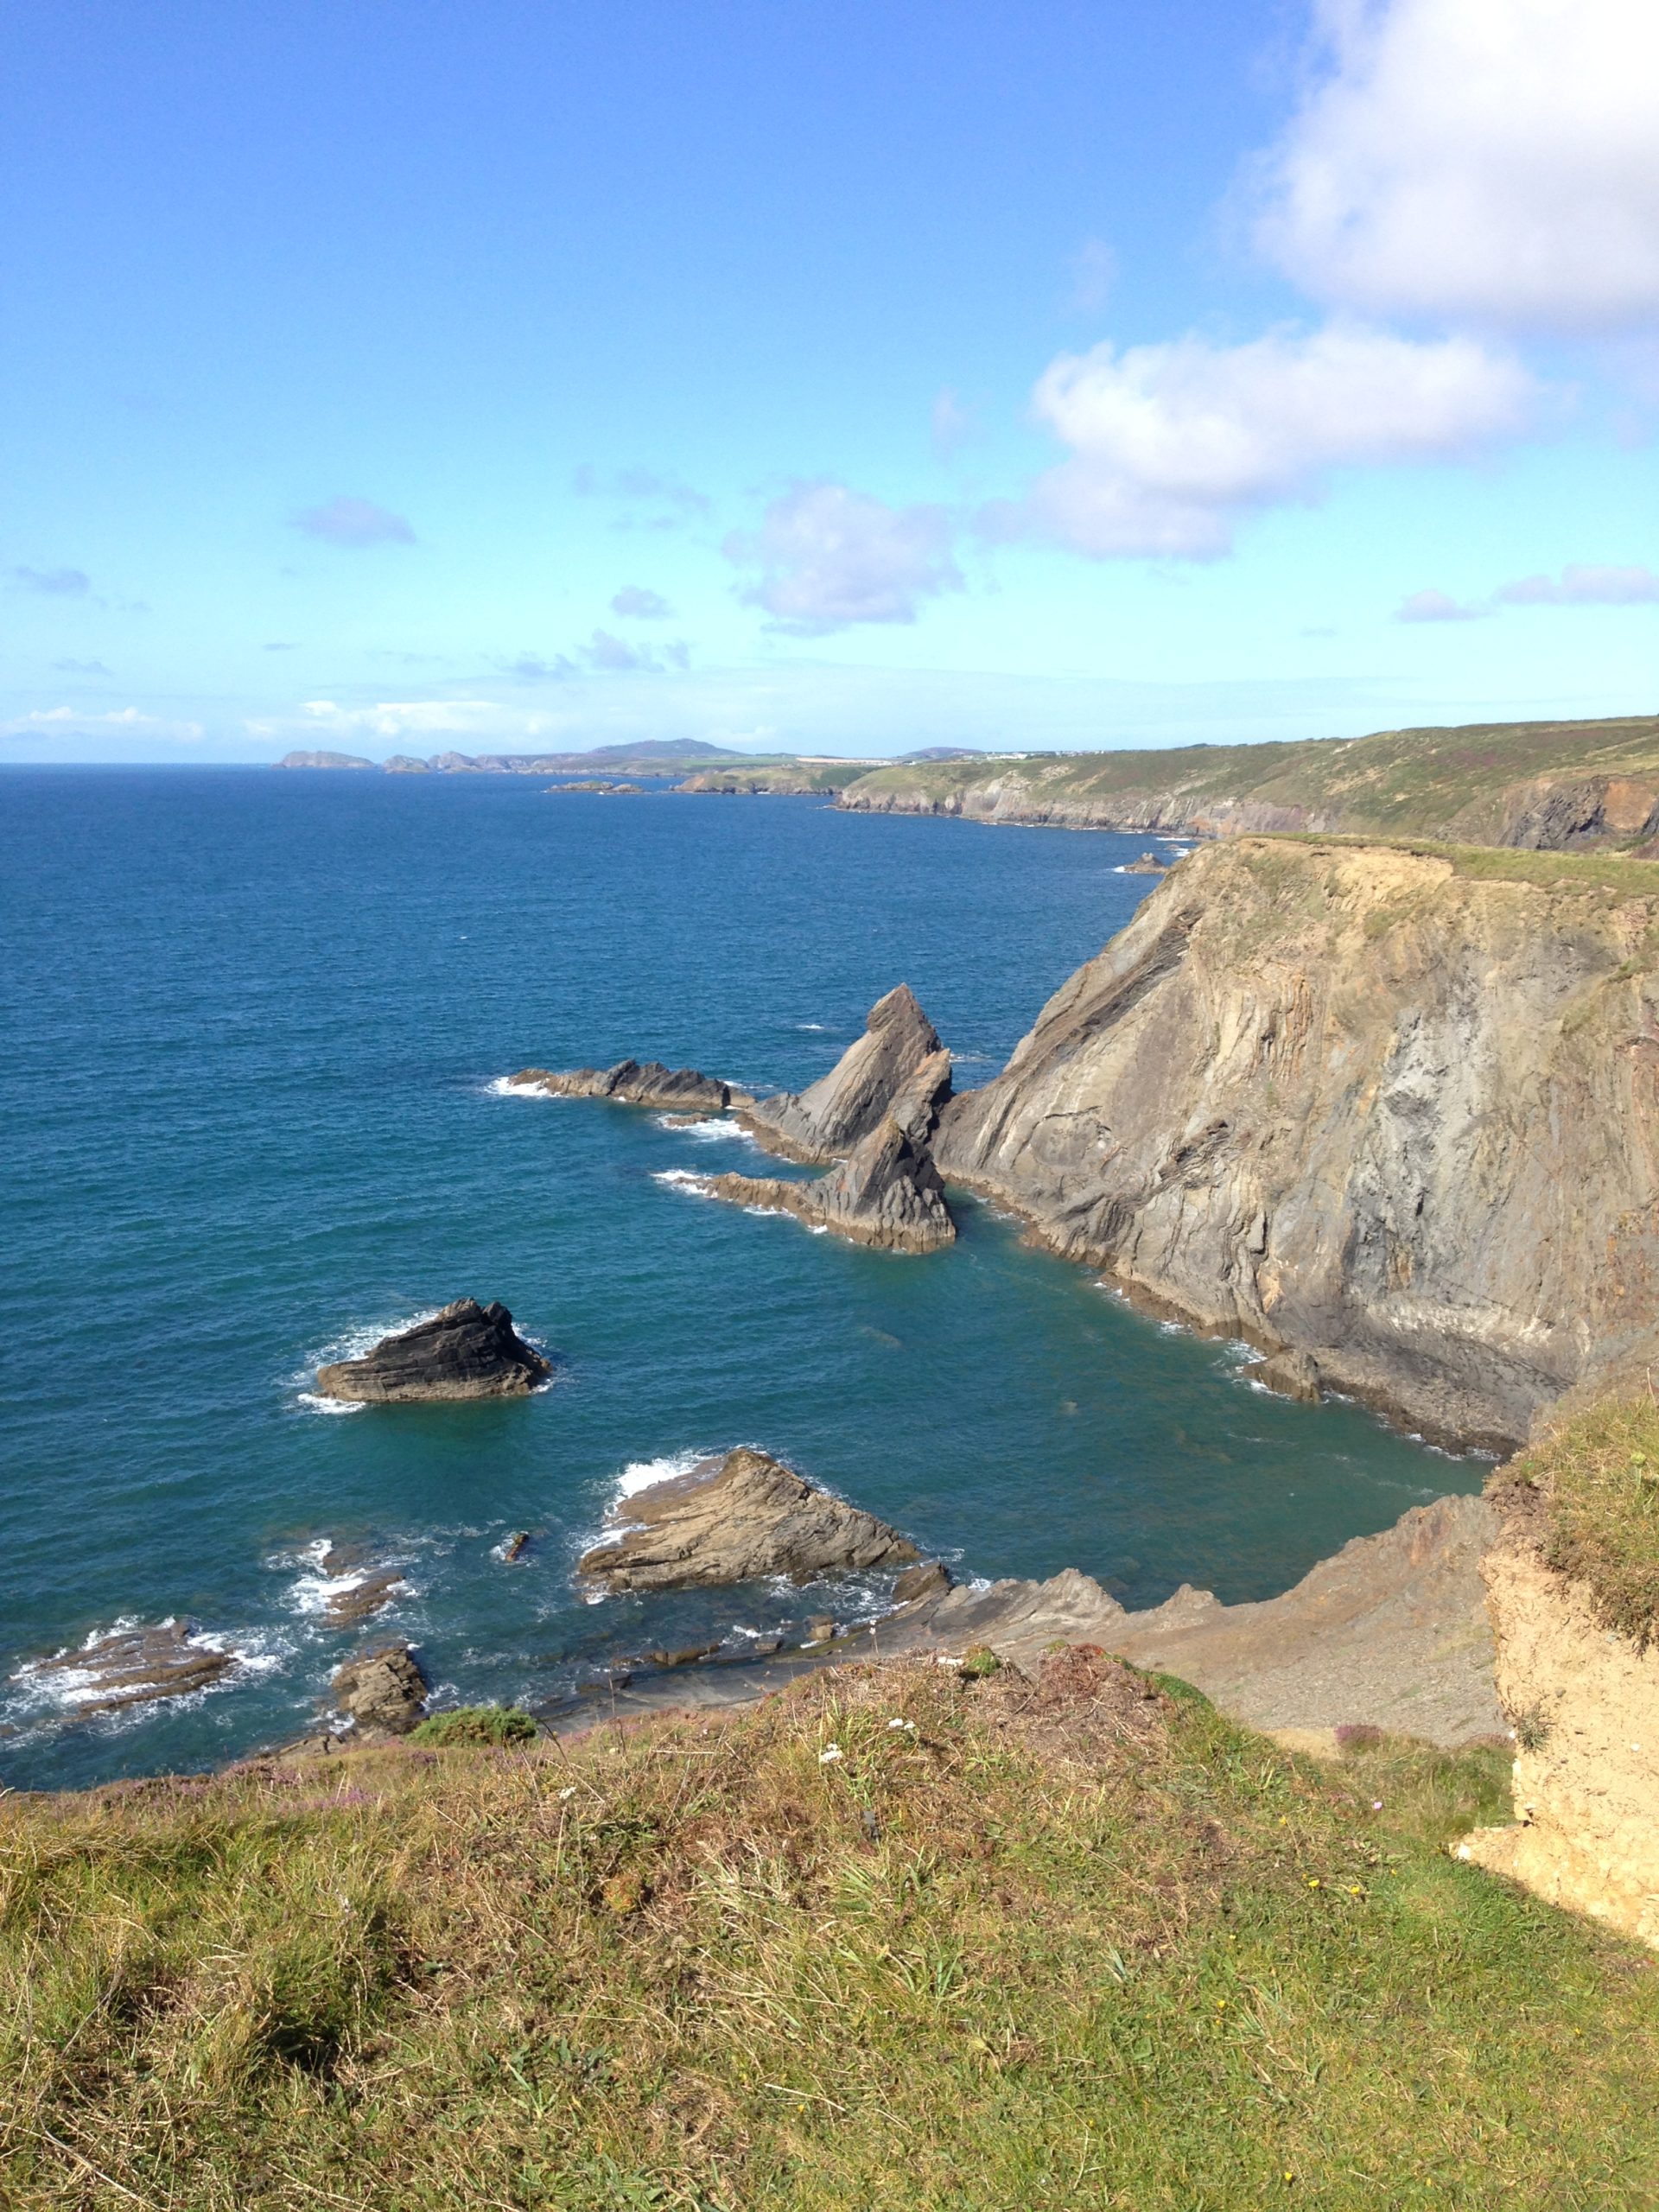 South Wales annual weekend fieldtrip to Pembrokeshire - Sat 14 to Sun 15 July 2018